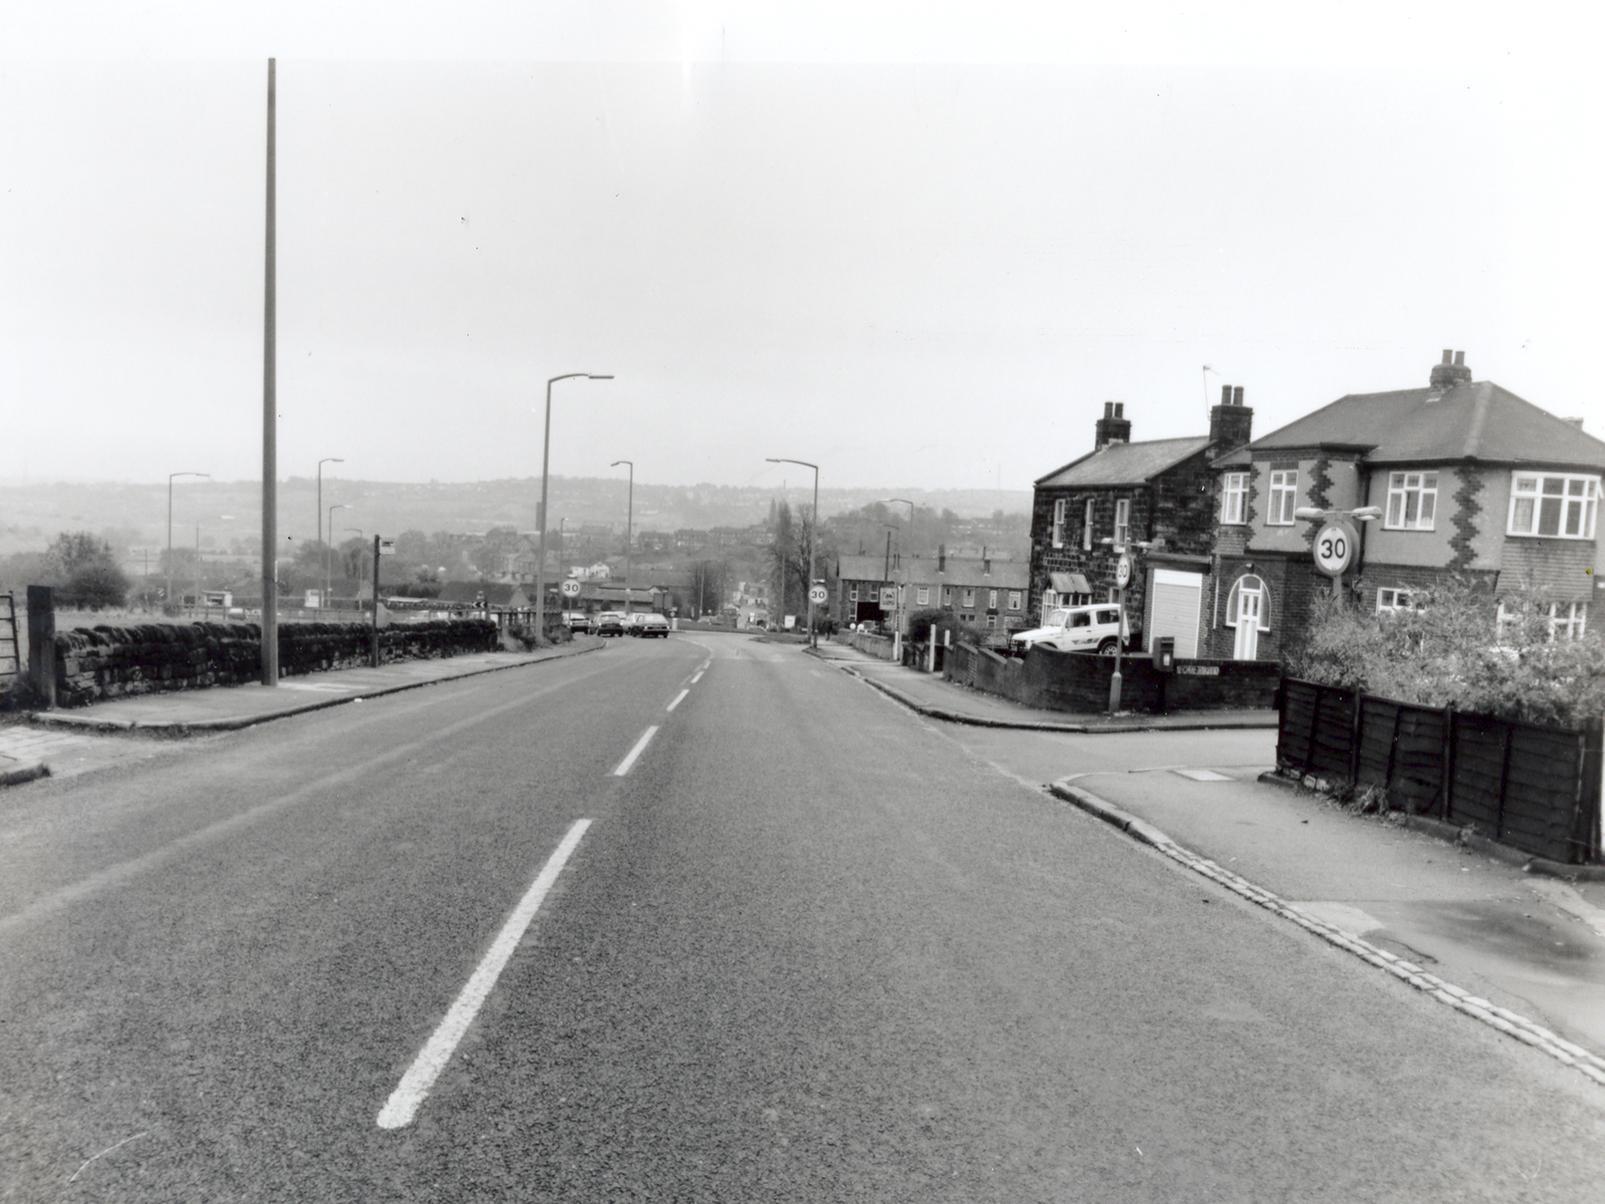 Rodley Lane looking down towards Rodley roundabout.